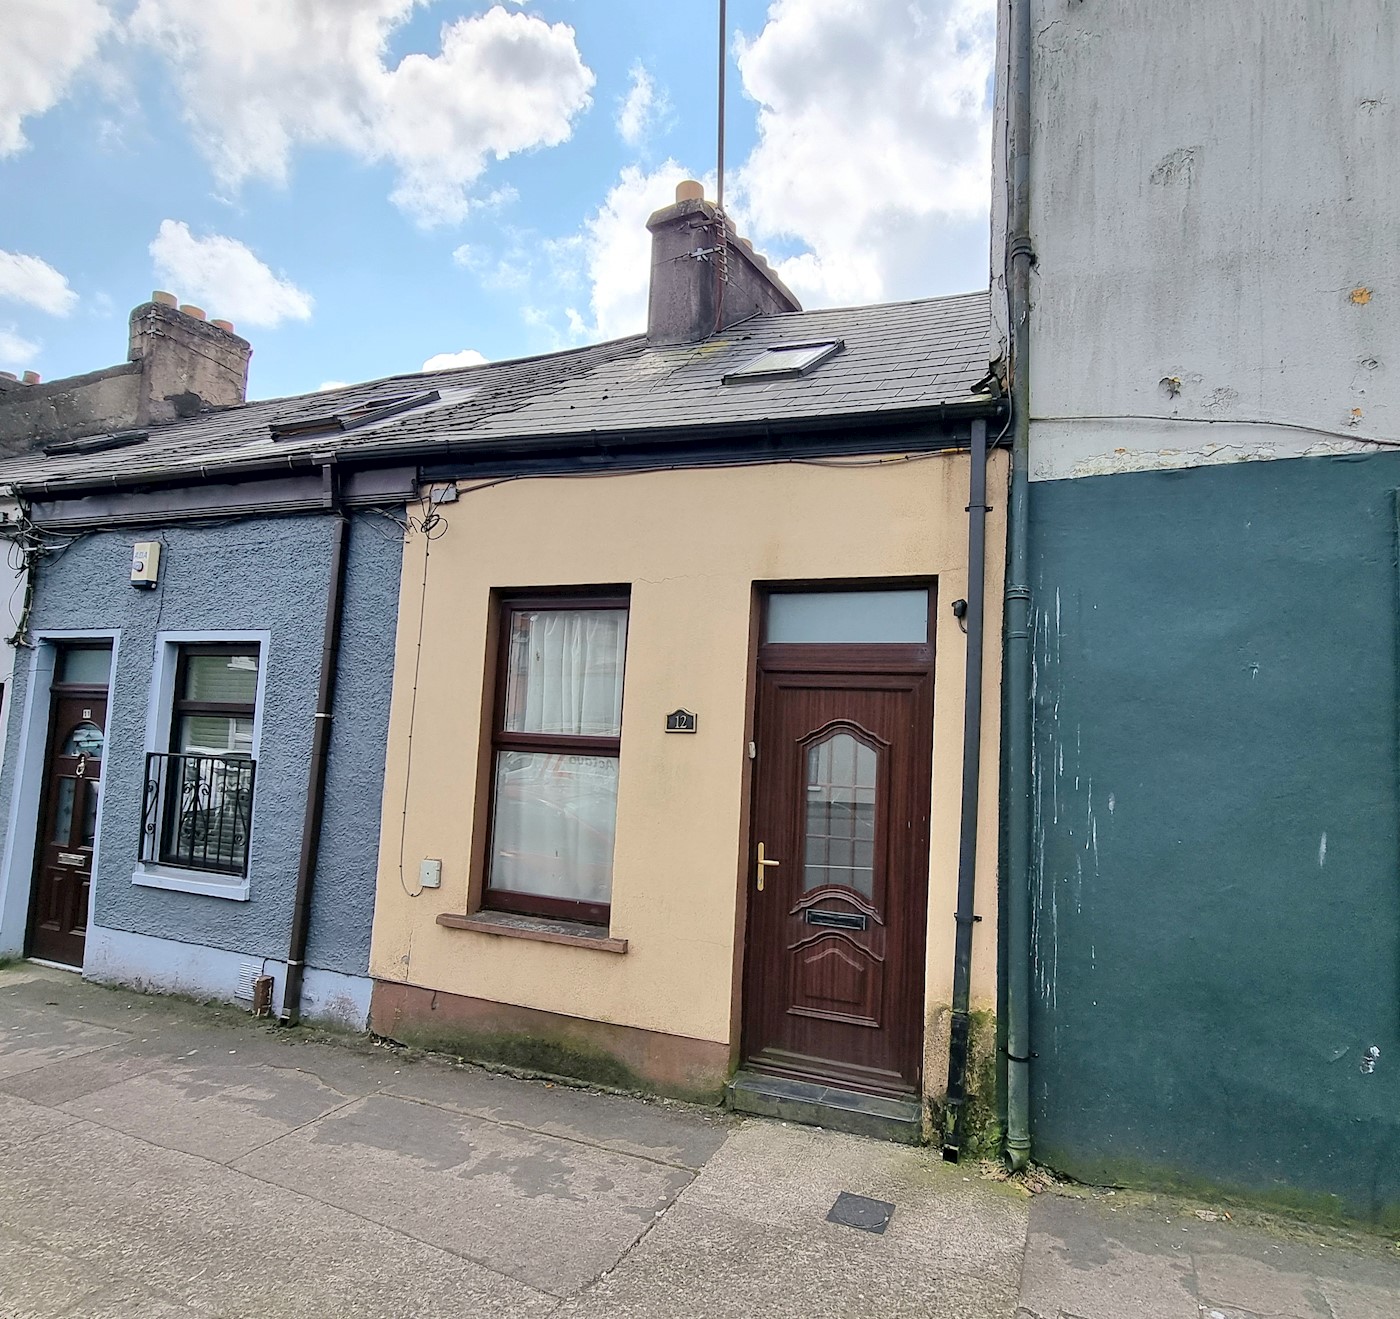 12 O’Connell Street, Blackpool, Co. Cork, T23 XY6P 1/8